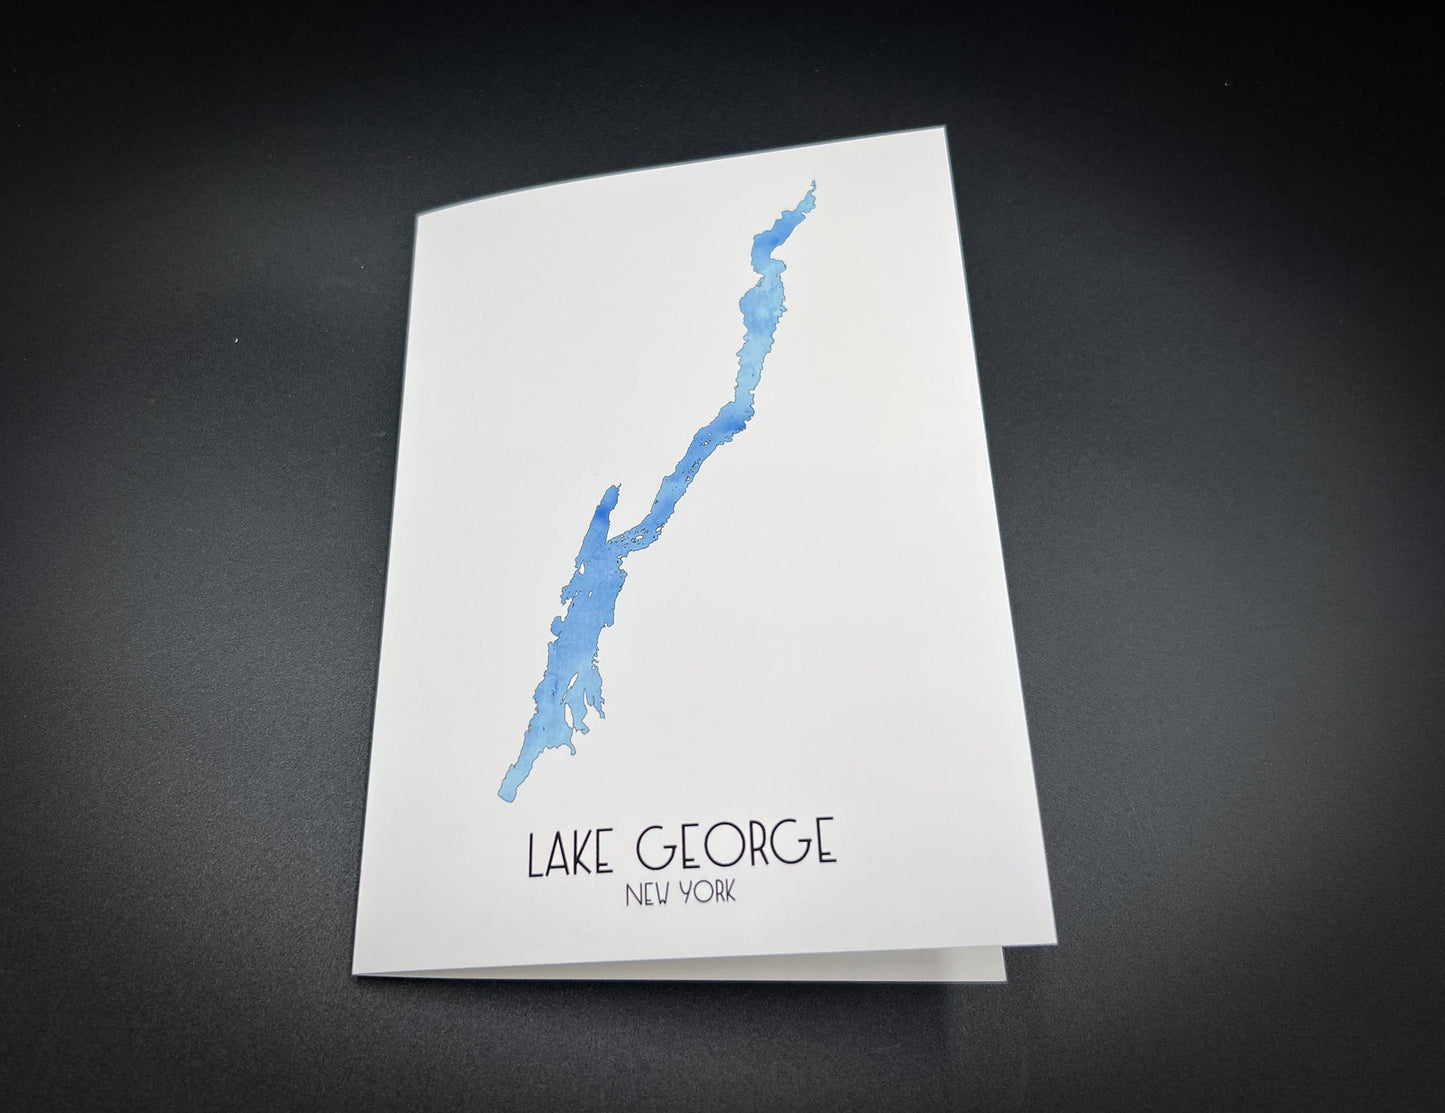 Lake George New York greeting card and home decoration